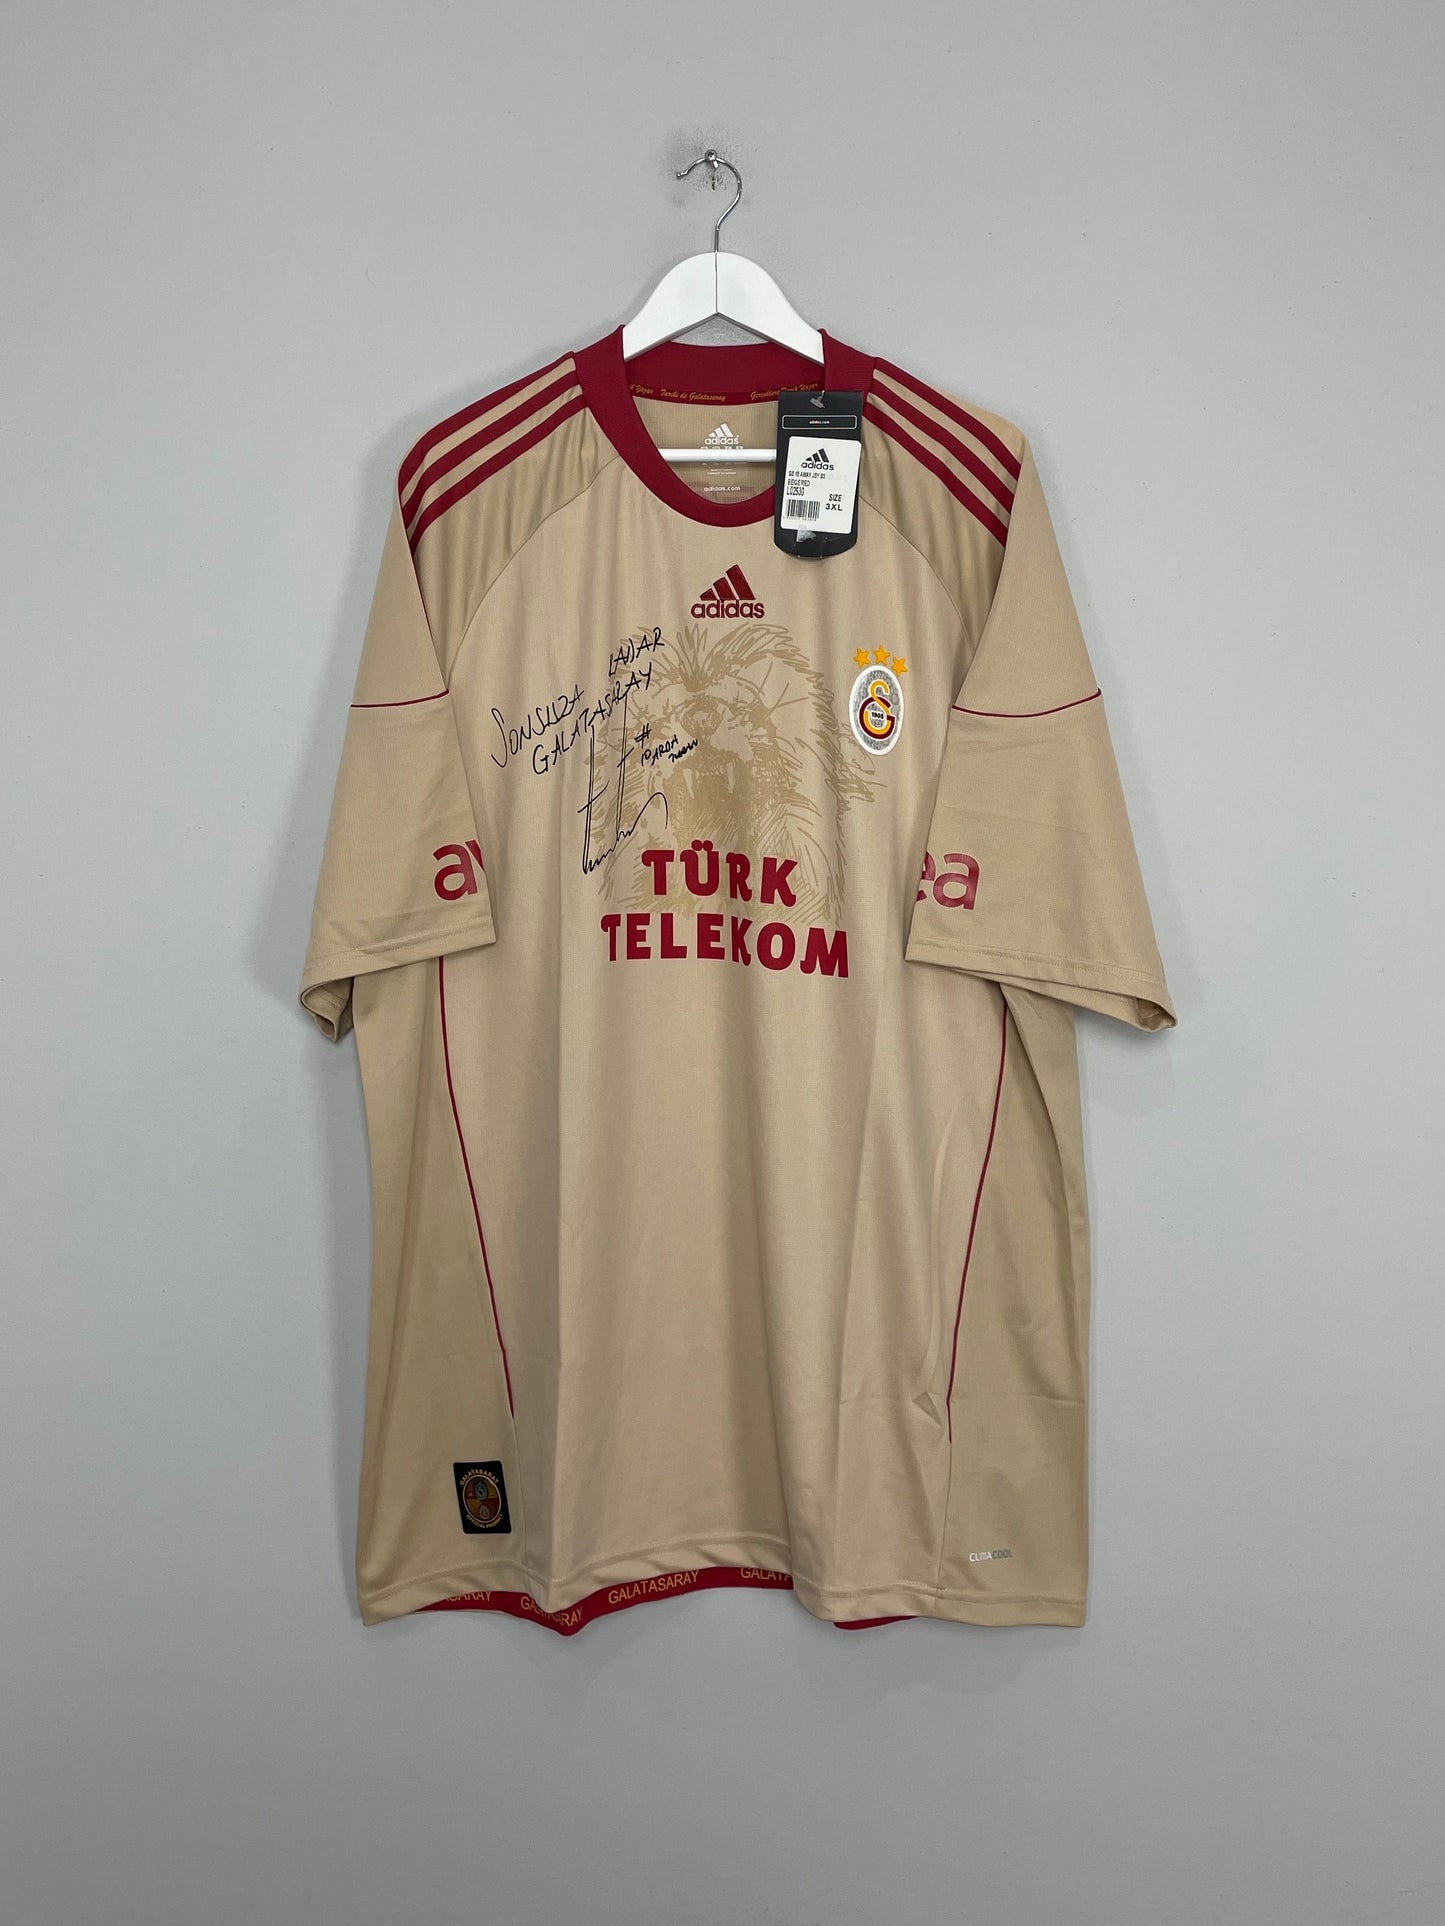 Image of the Galatasaray shirt from the 2010/11 season